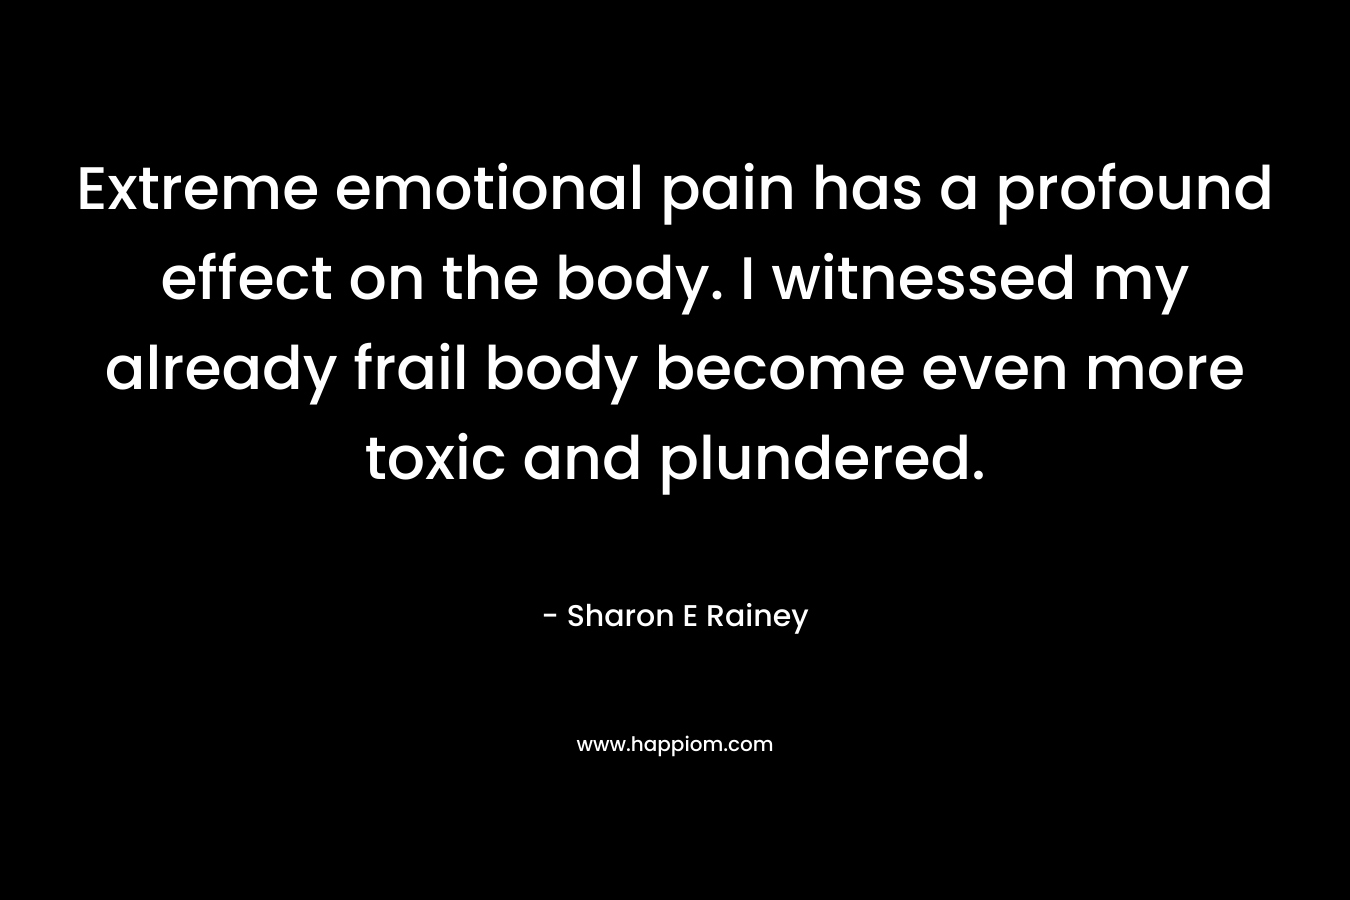 Extreme emotional pain has a profound effect on the body. I witnessed my already frail body become even more toxic and plundered.